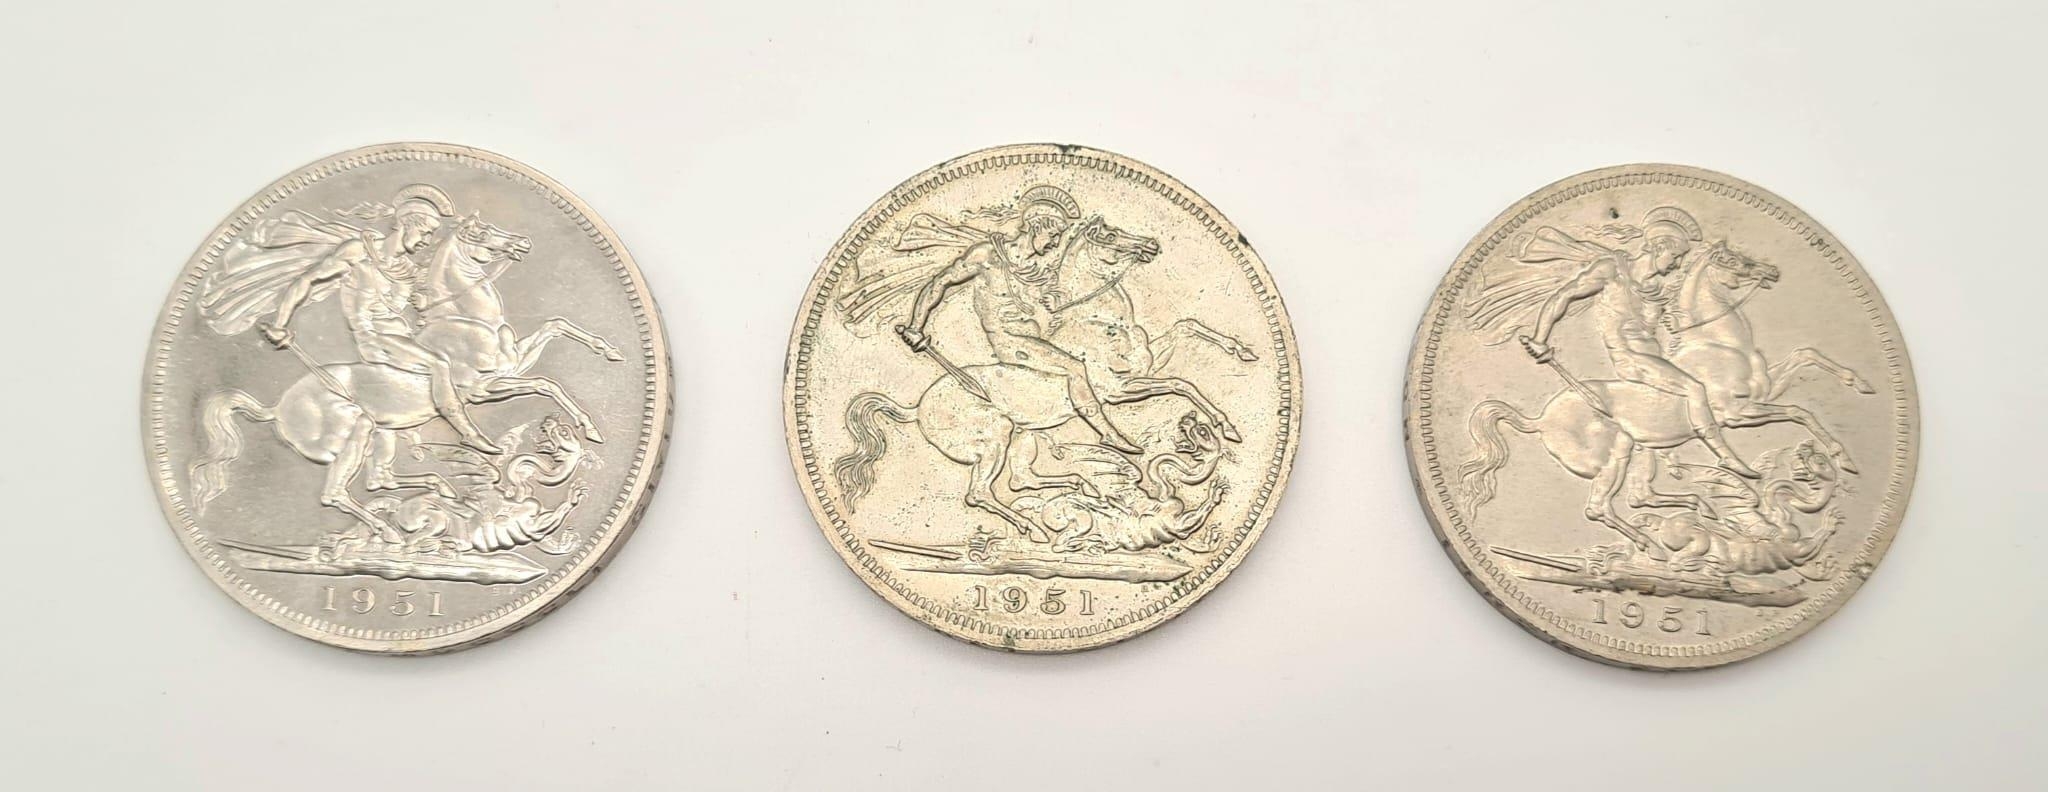 Three Festival of Britain 1951 George VI Crowns. Two in original boxes. Please see photos for - Image 2 of 6